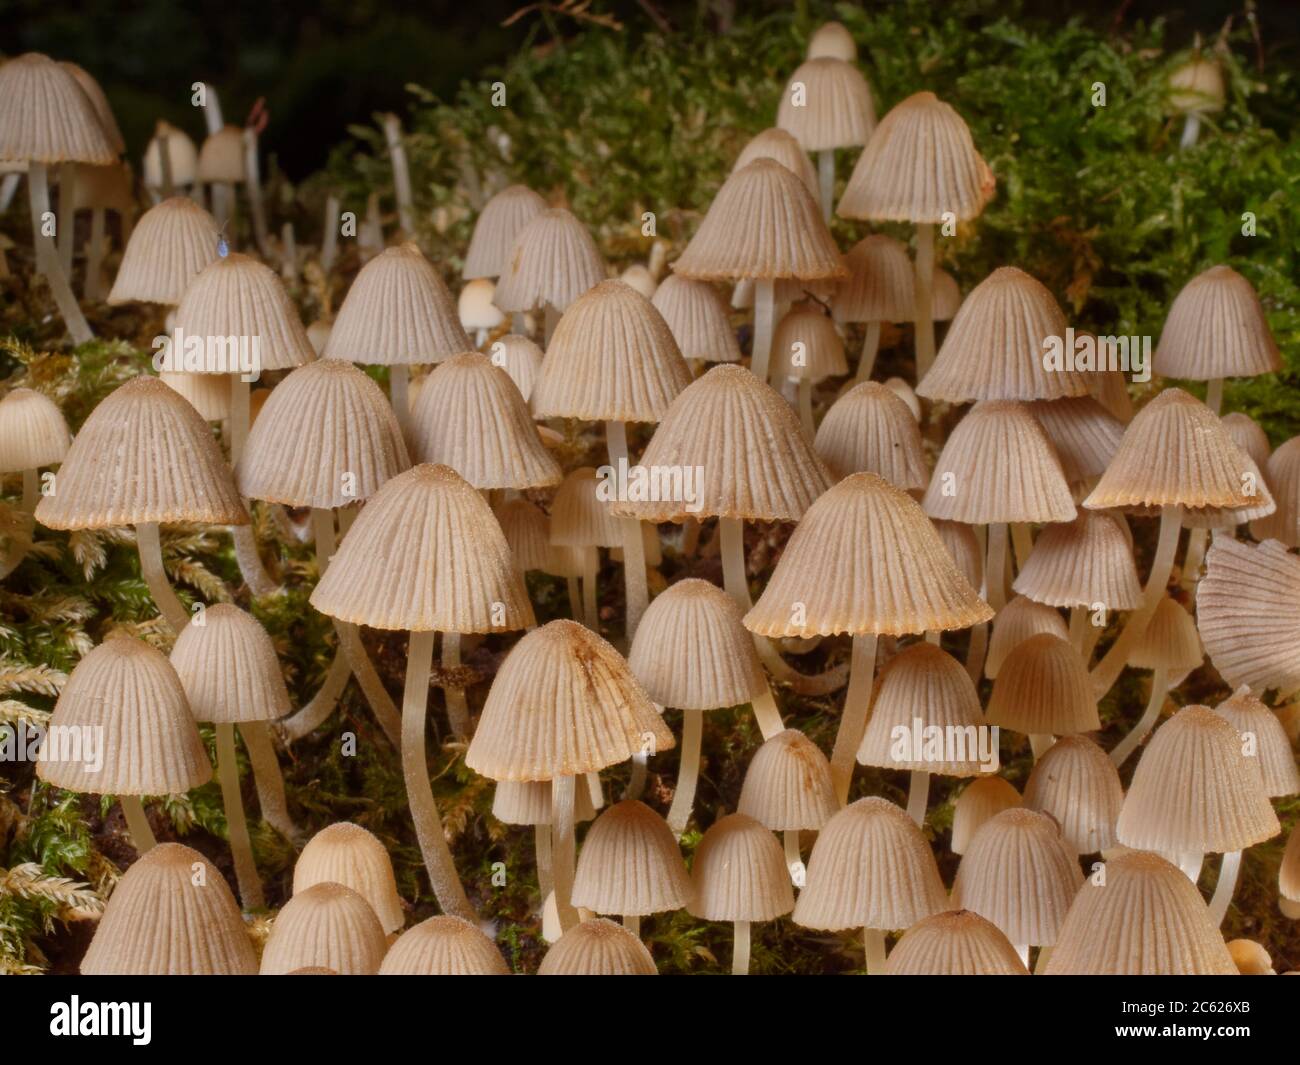 Fairies’ bonnets / Fairy inkcap fungi (Coprinellus disseminatus) clump growing on a rotting log,  Lower Woods, Gloucestershire, UK, October. Stock Photo